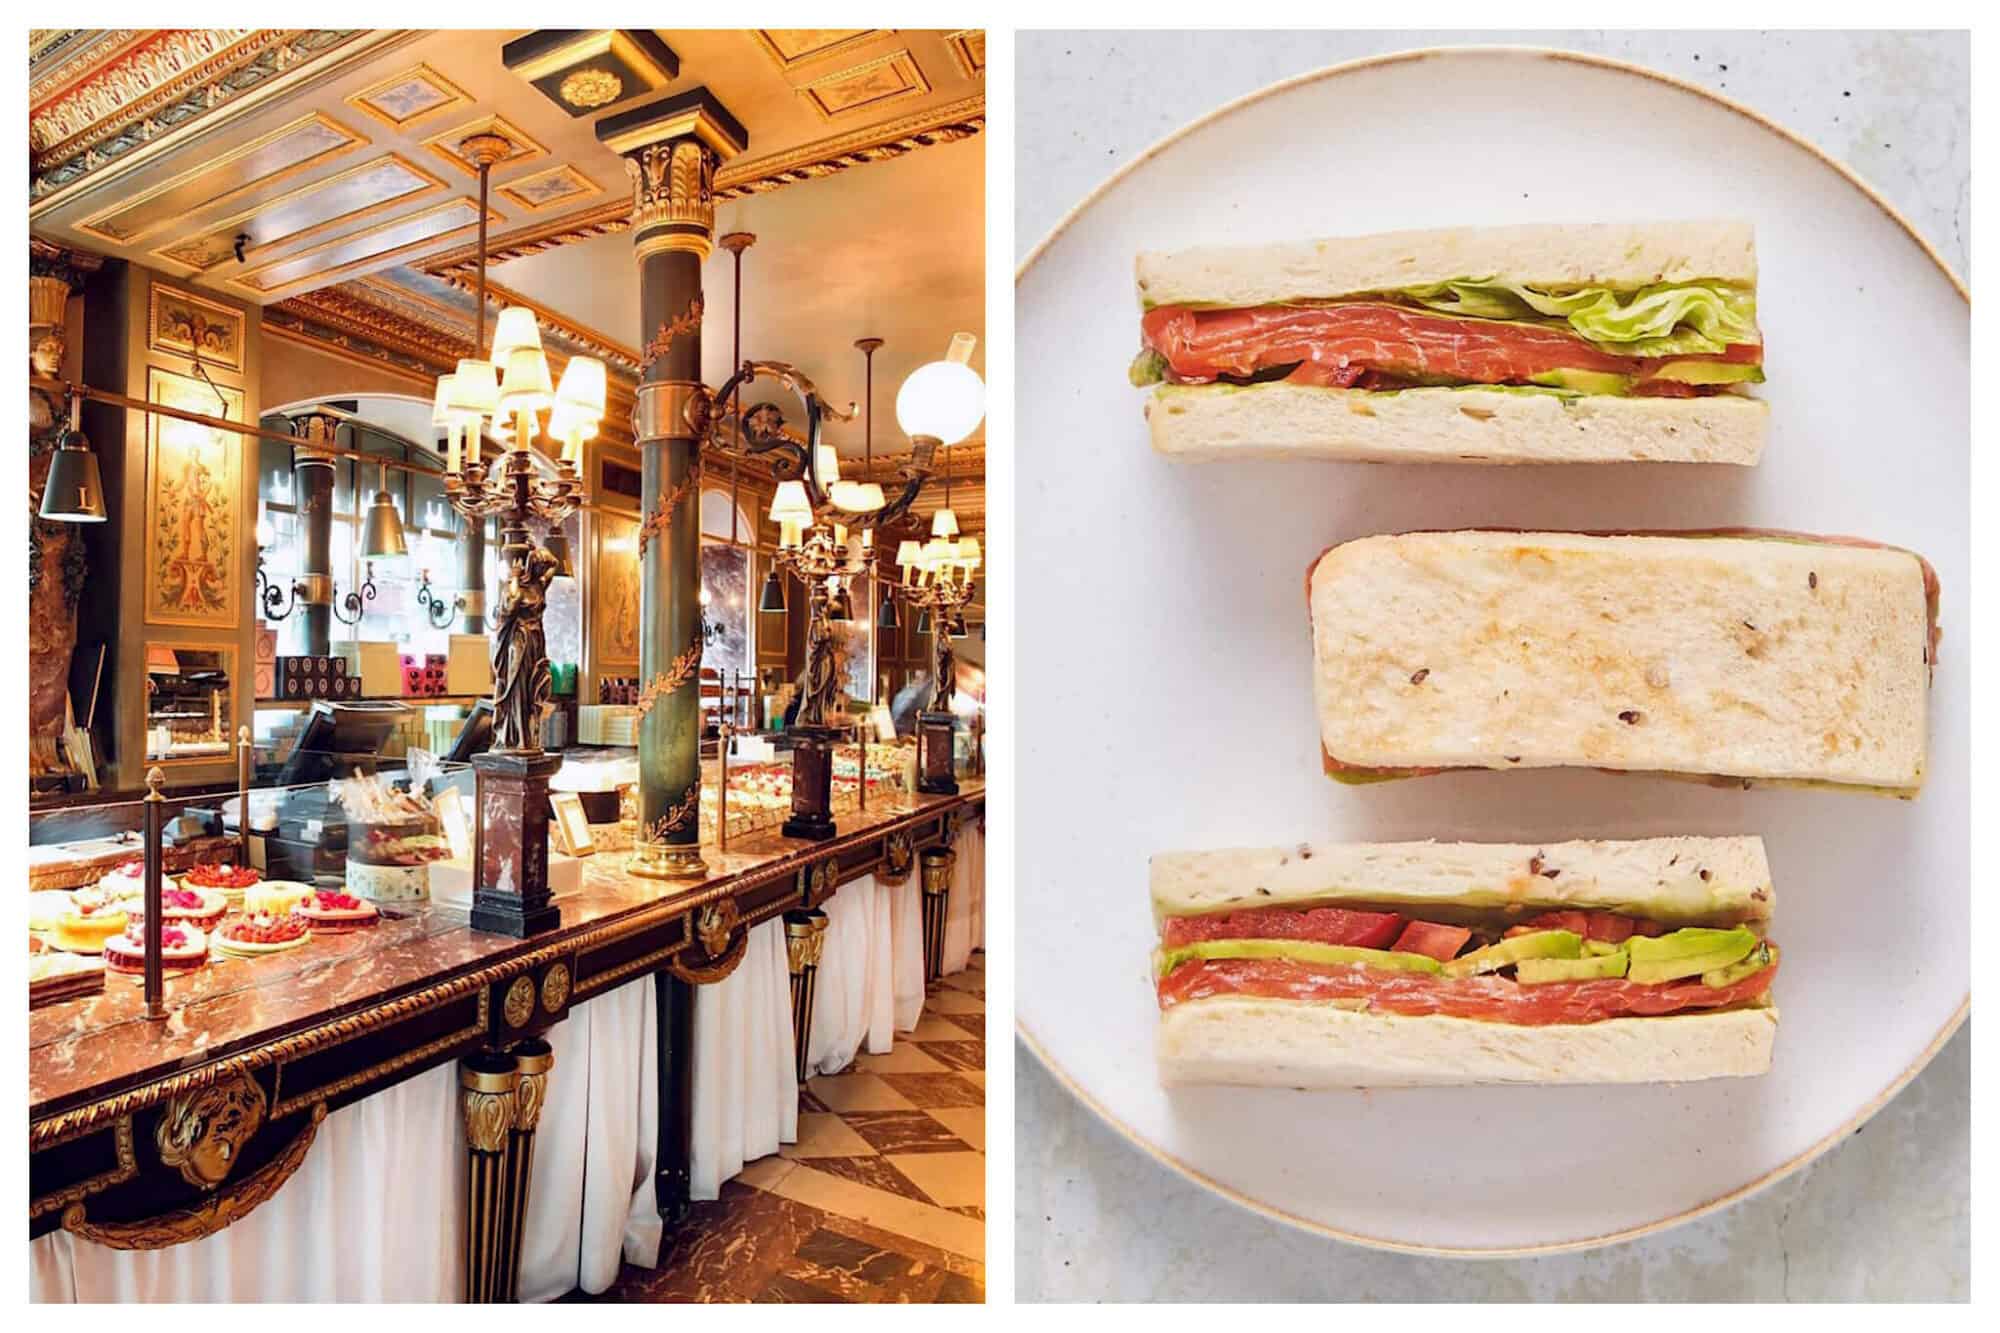 Left: Inside the Ladurée restaurant and store on the Champs Elysées. The inside is decorated with beautiful marble and bright lights, Right: Salmon and avocado sandwiches are lined up on a flat white plate at Ladurée.